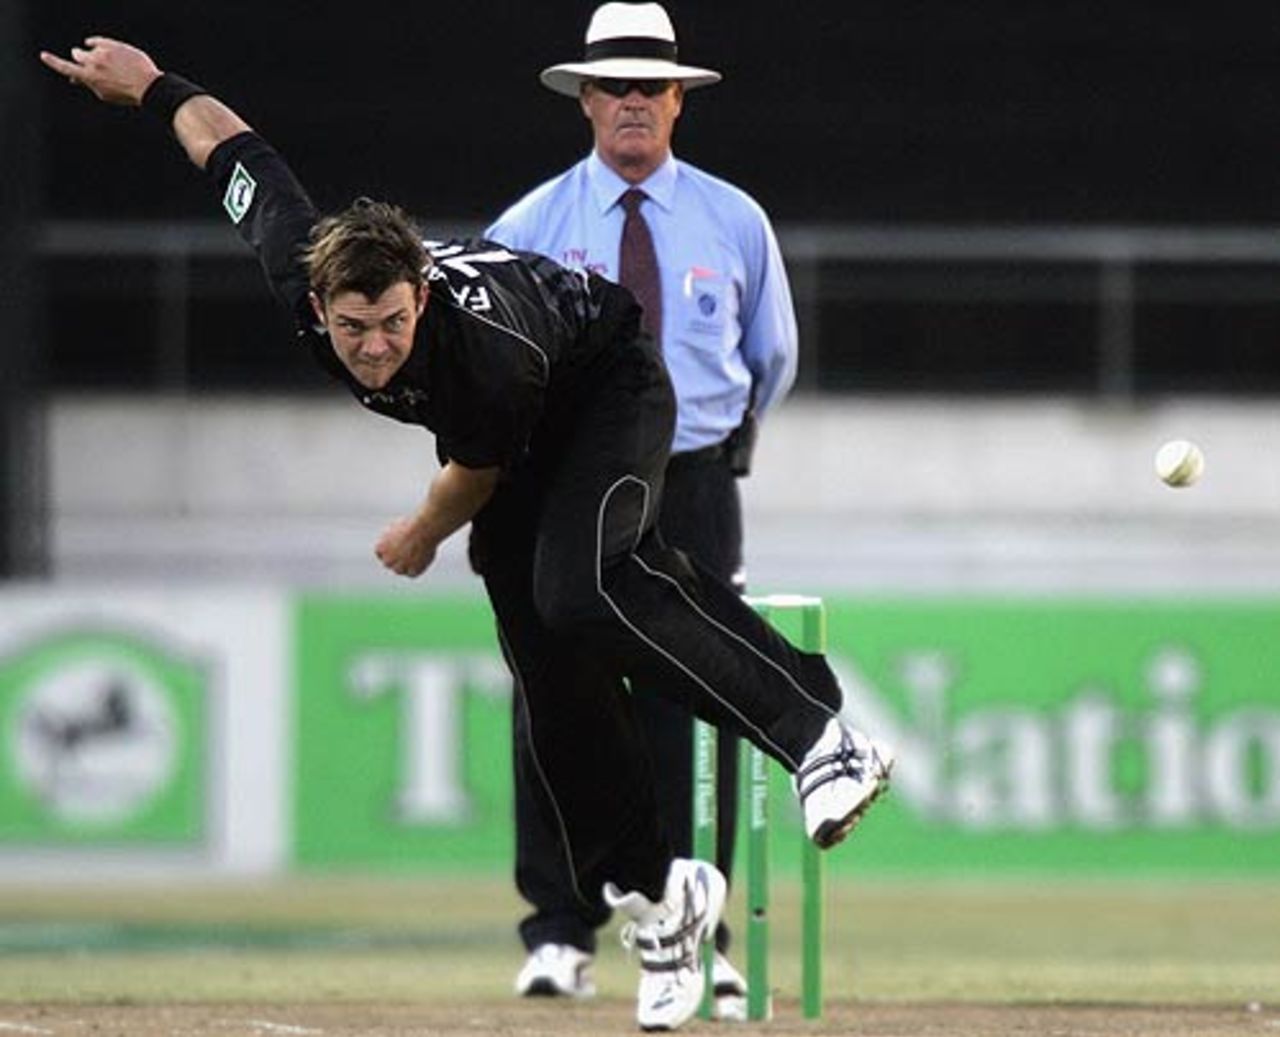 James Franklin at his delivery stride, New Zealand v West Indies, 1st ODI, Wellington, February 18 2006